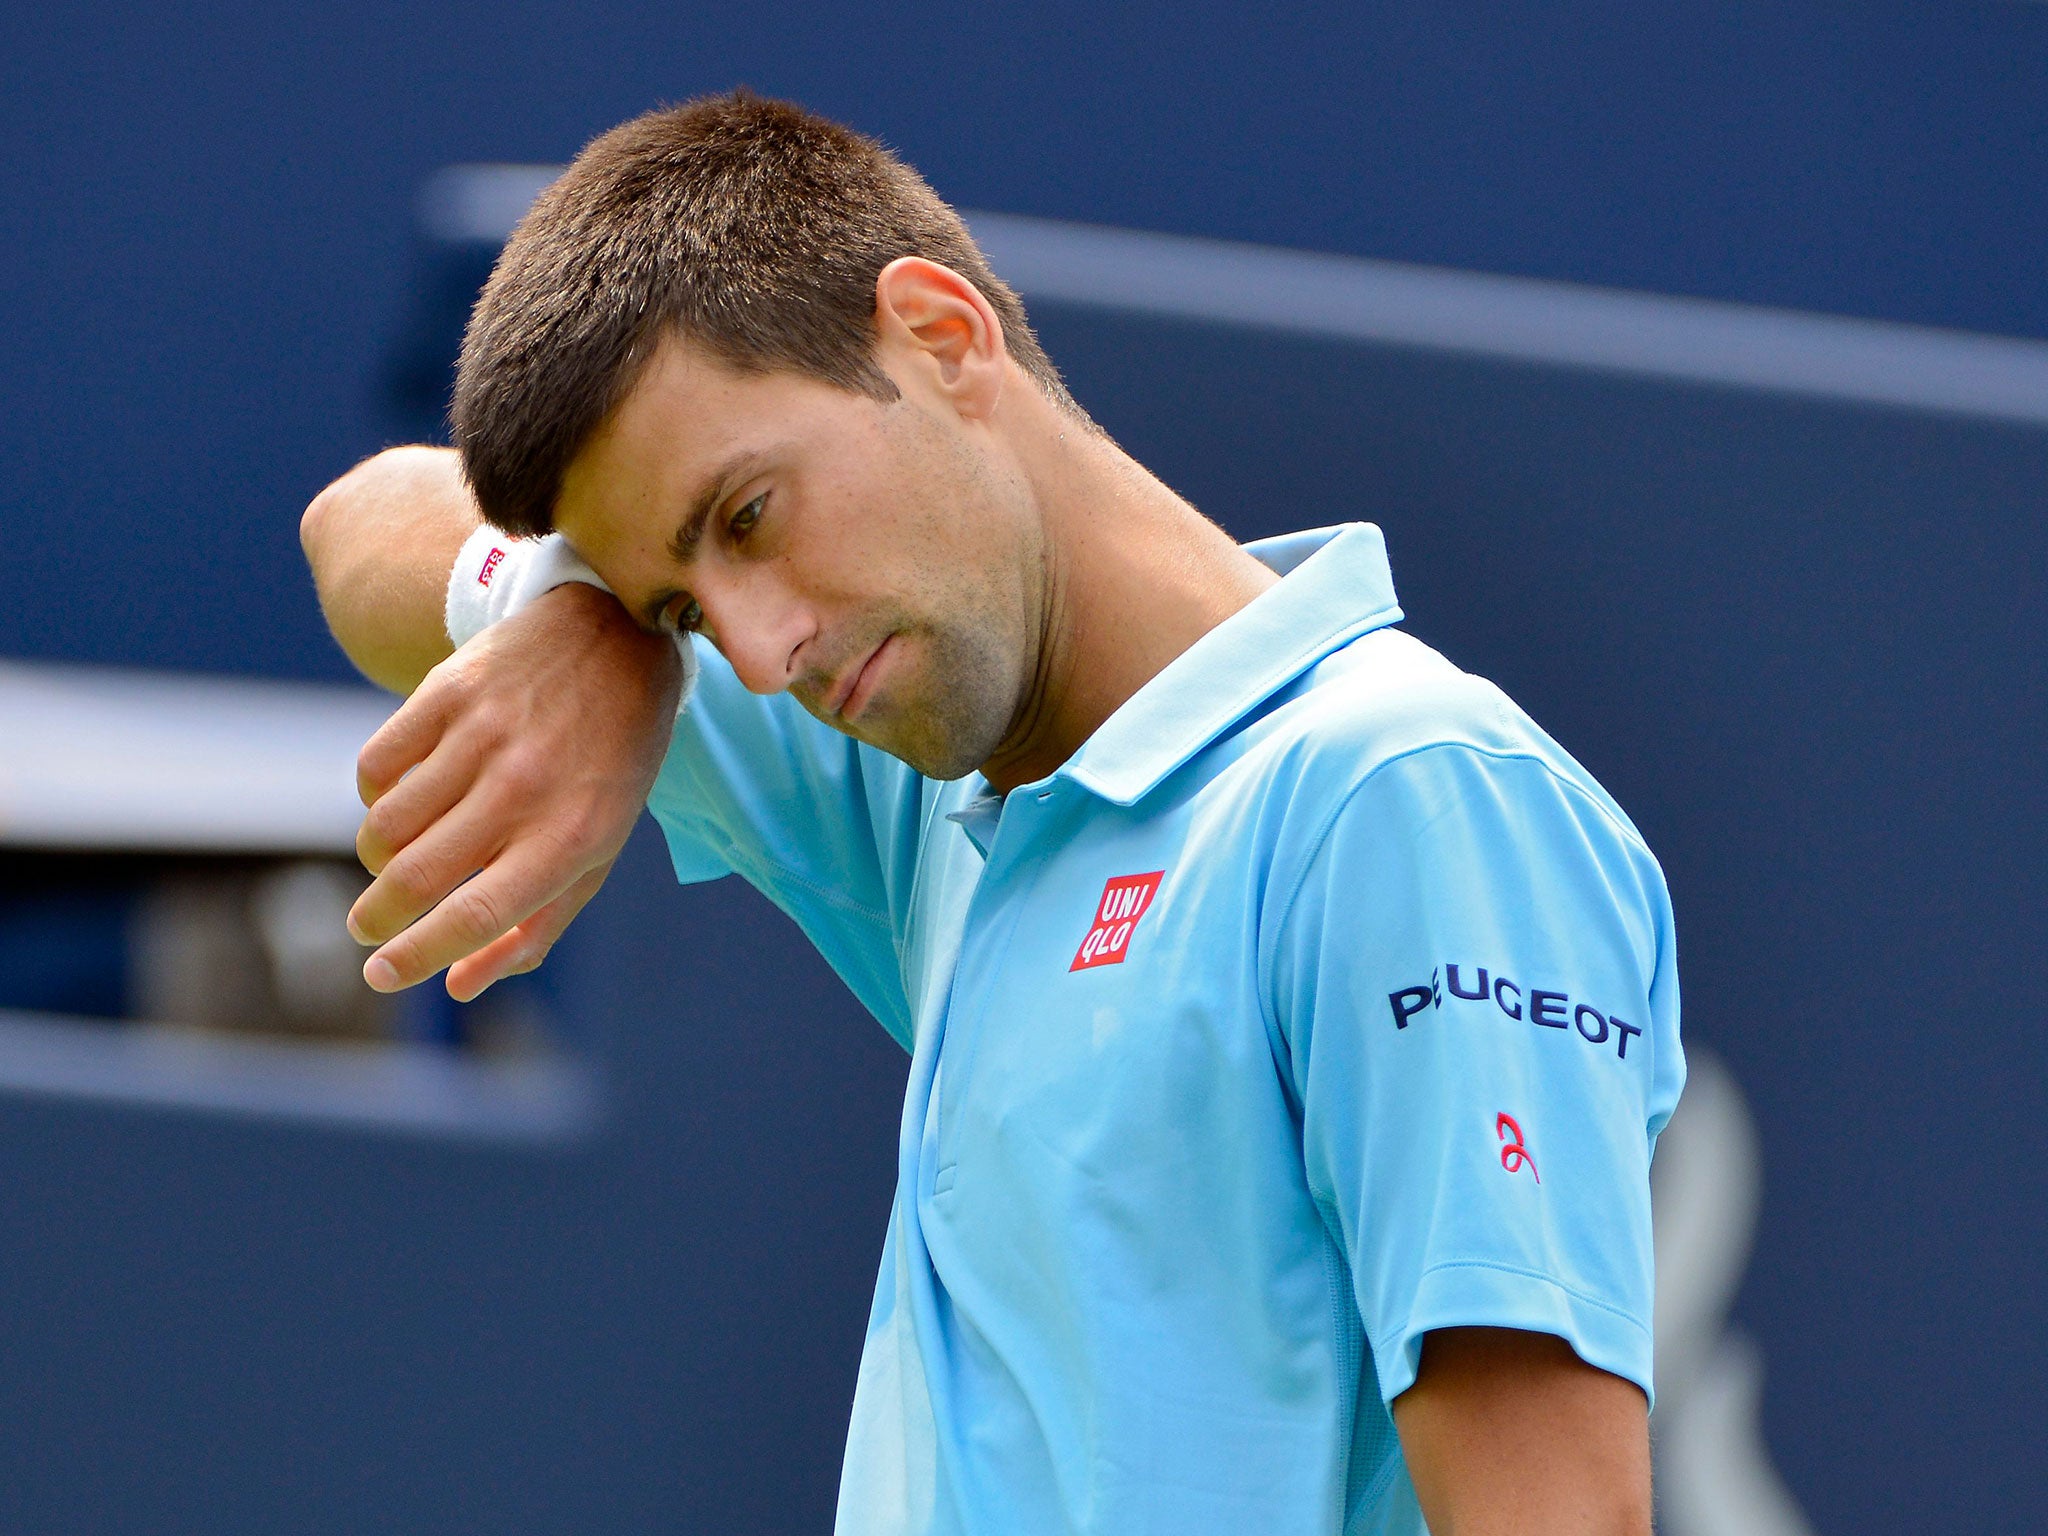 Novak Djokovic cuts a frustrated figure on his way to defeat at the Toronto Masters